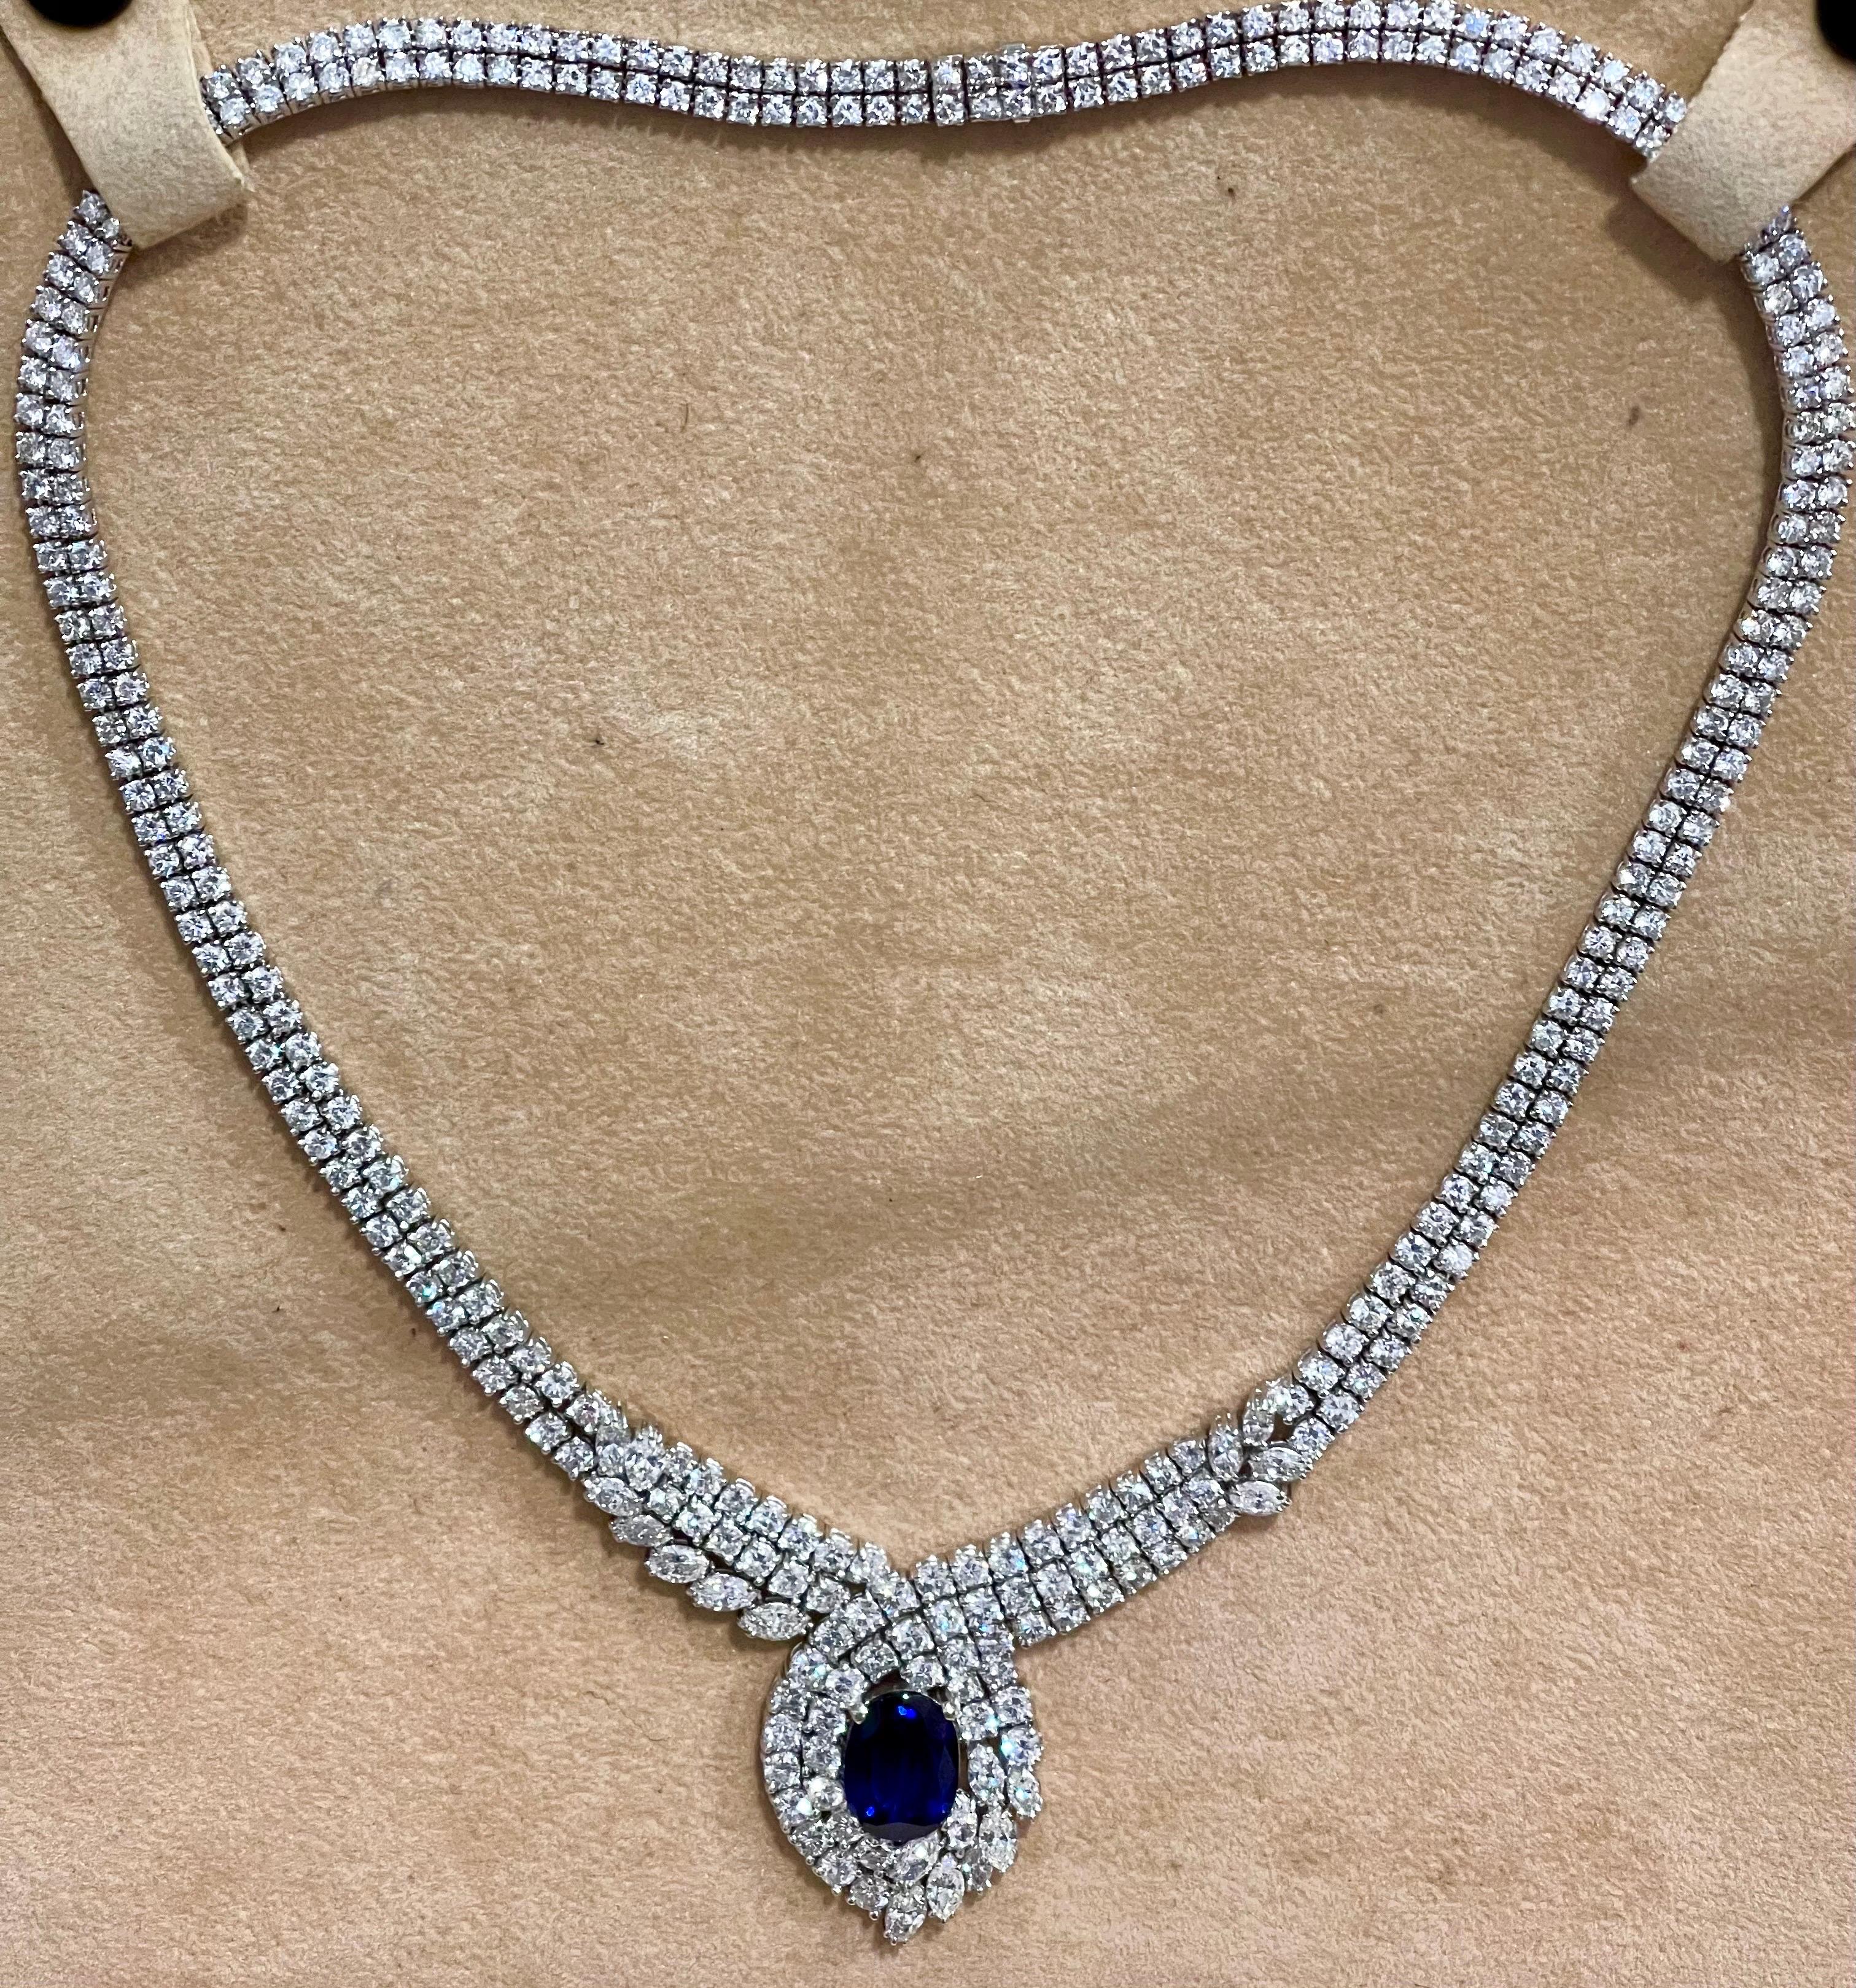 Vintage GIA Certified 6.5Ct Ceylon Sapphire & 32 Ct Diamond Necklace 18K W Gold For Sale 1